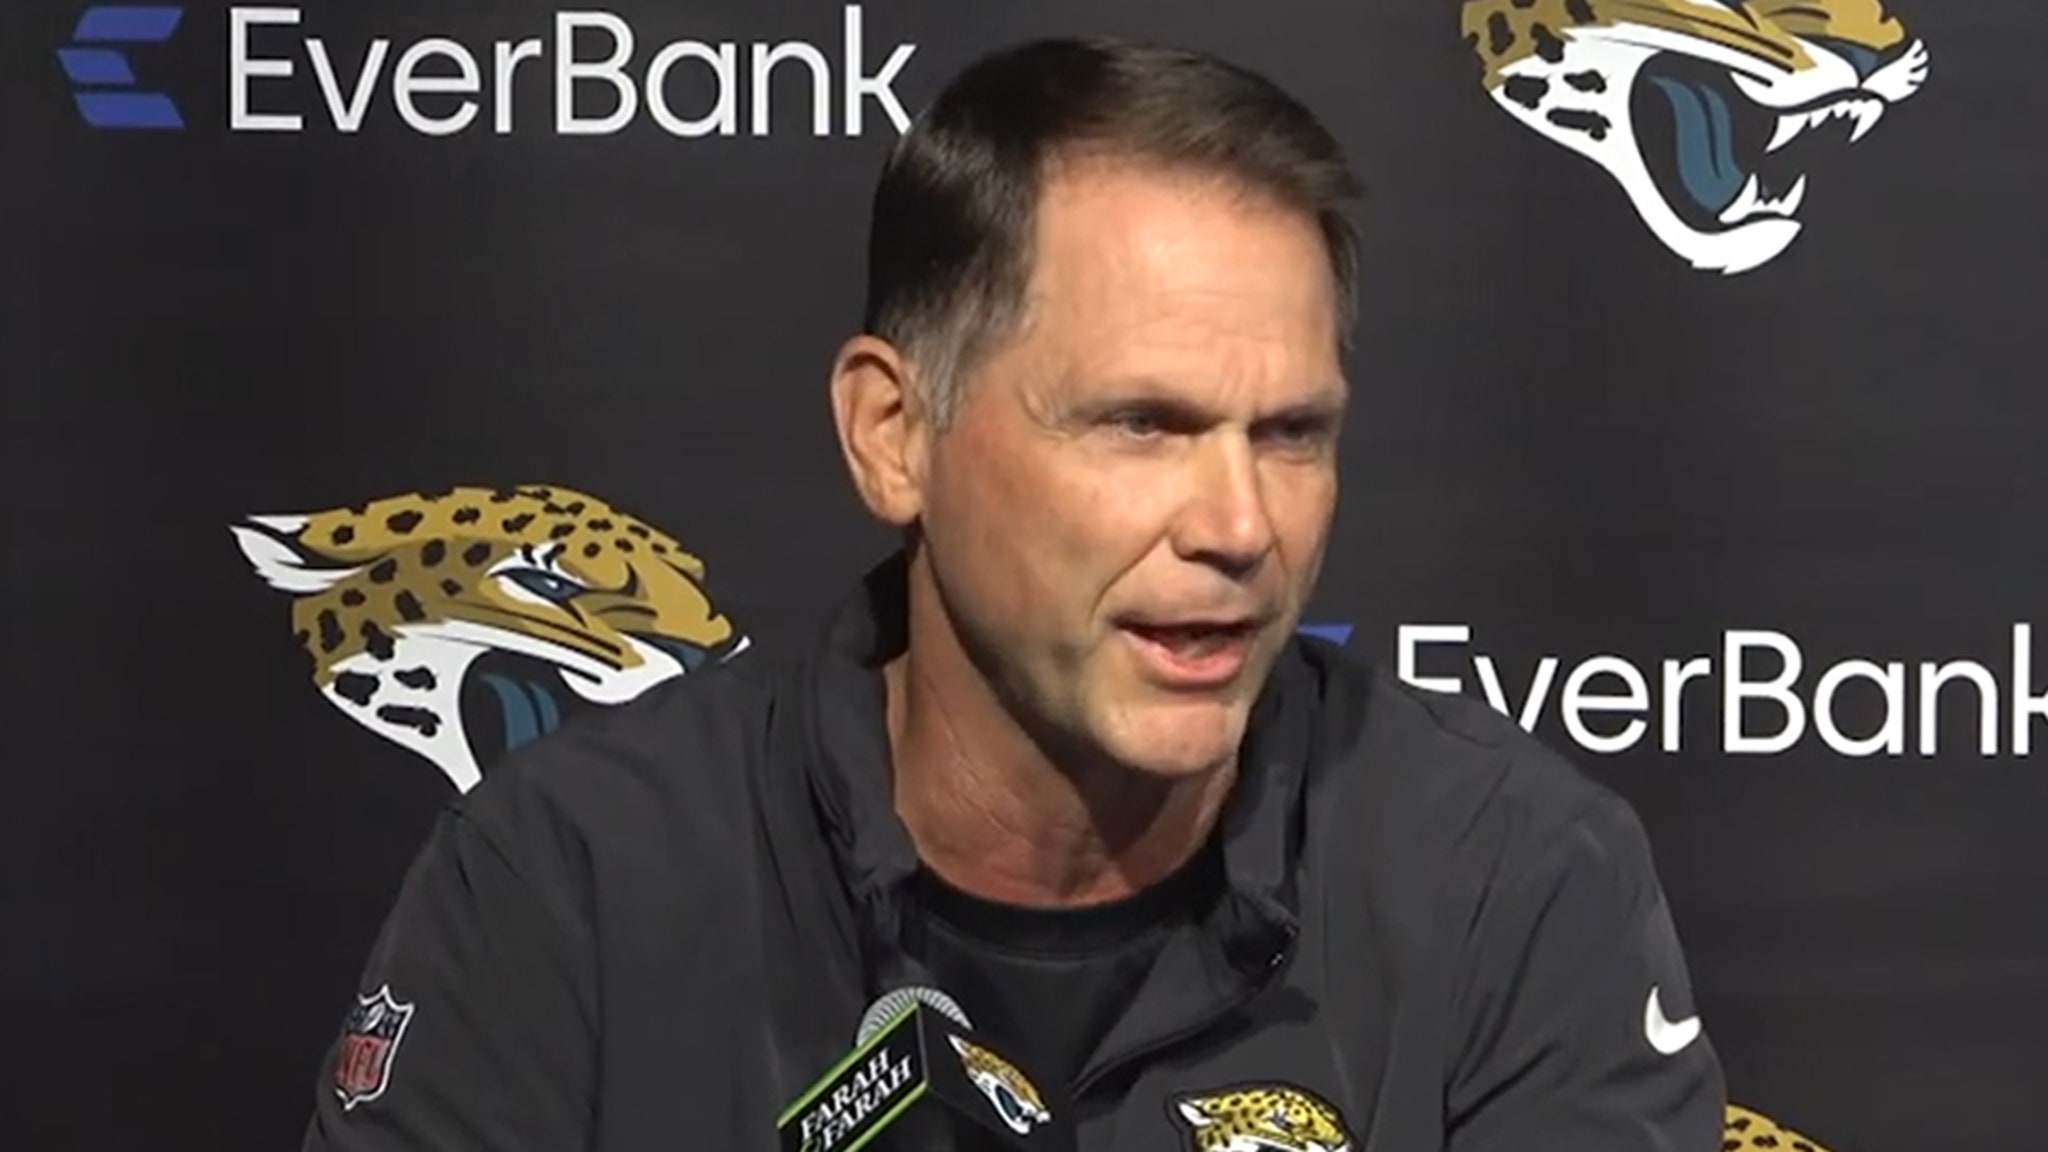 Jaguars GM Trent Baalke Appears To Fart Mid-Answer At News Conference